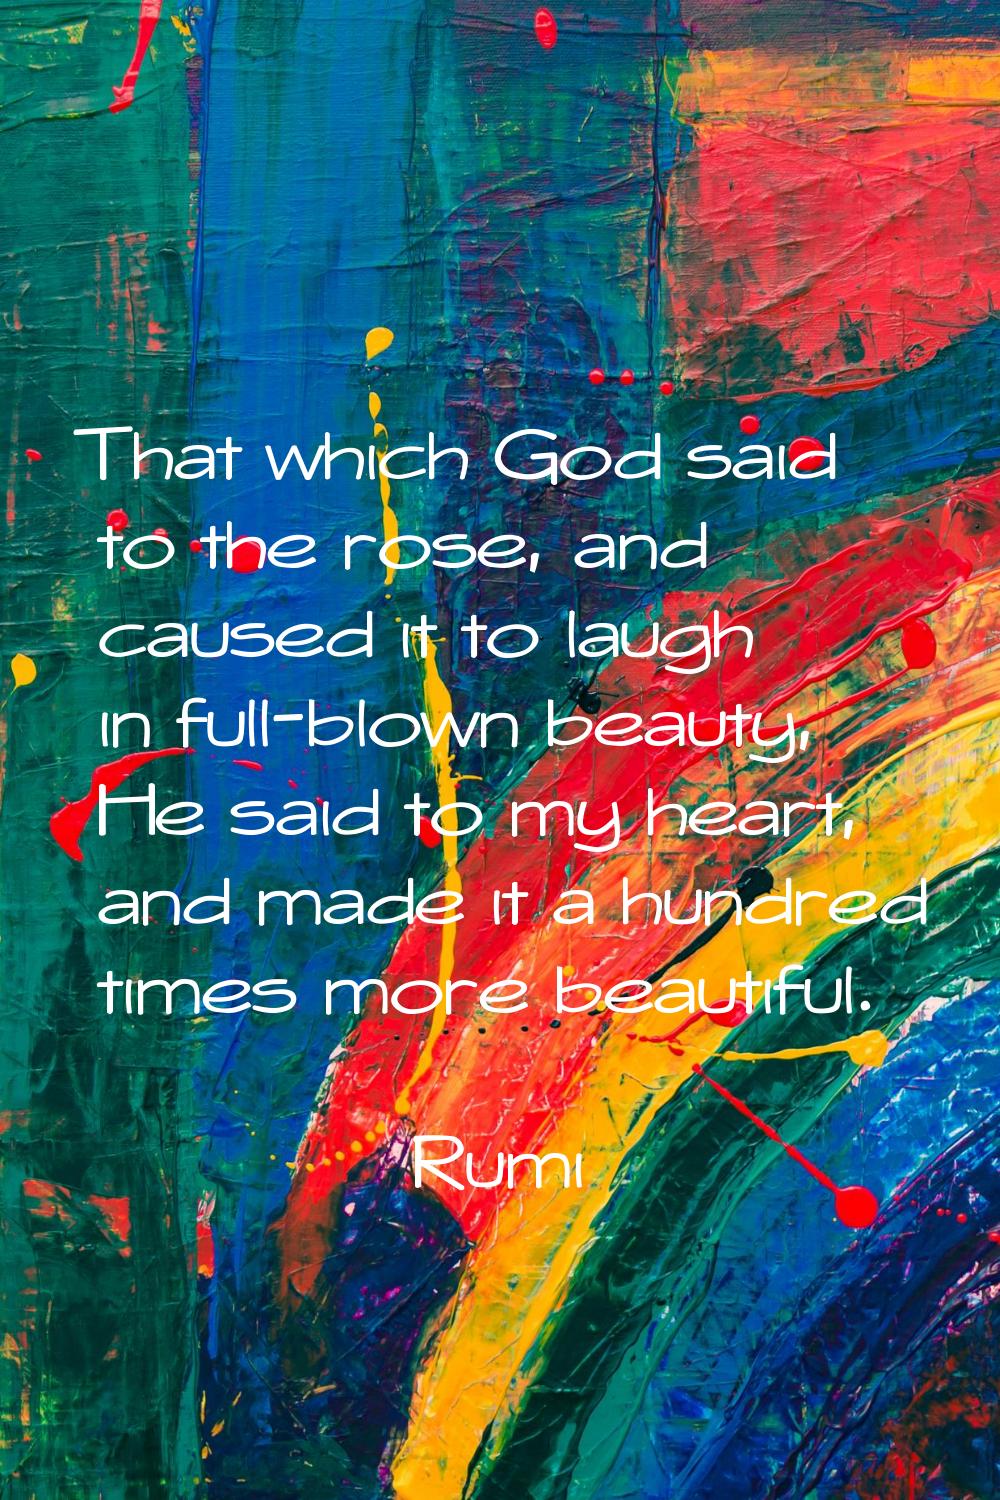 That which God said to the rose, and caused it to laugh in full-blown beauty, He said to my heart, 